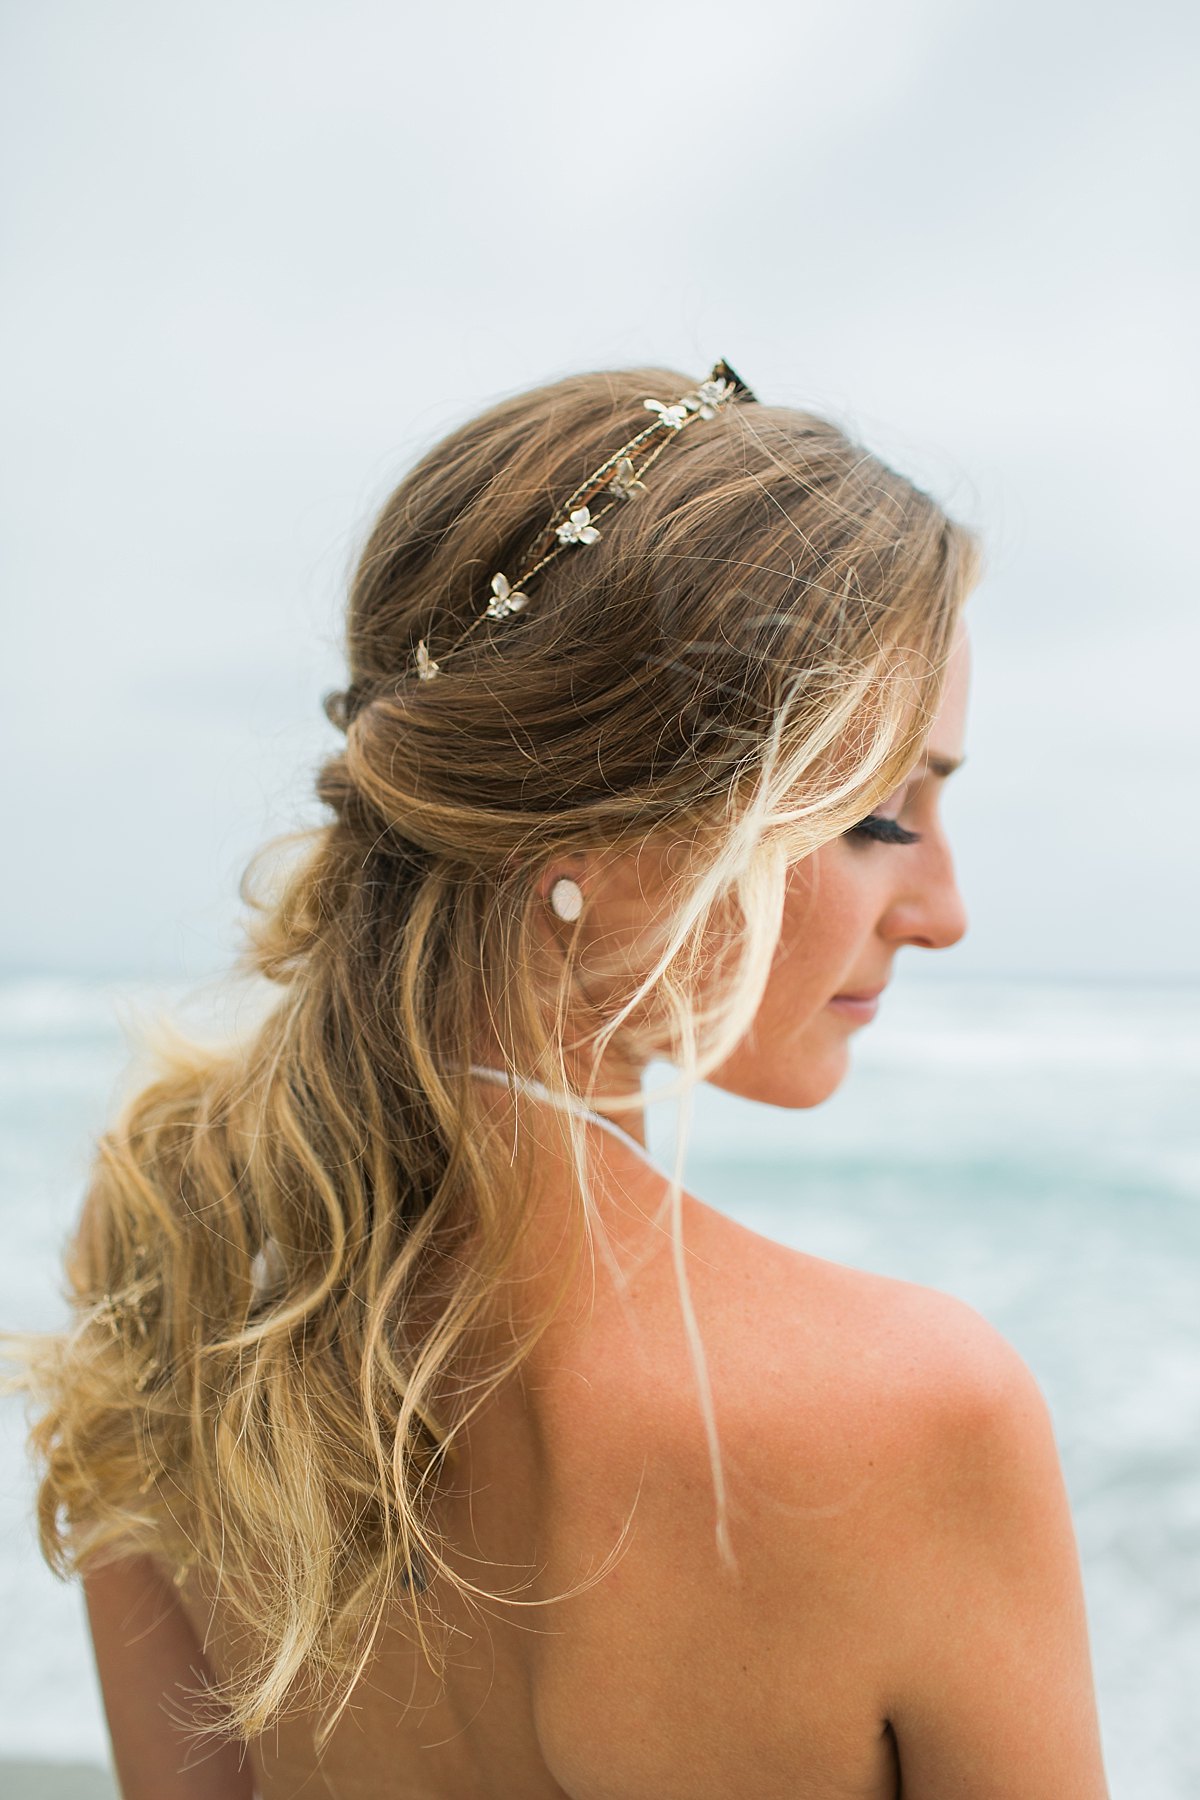 A delicate bridal headpiece from Styled by TC